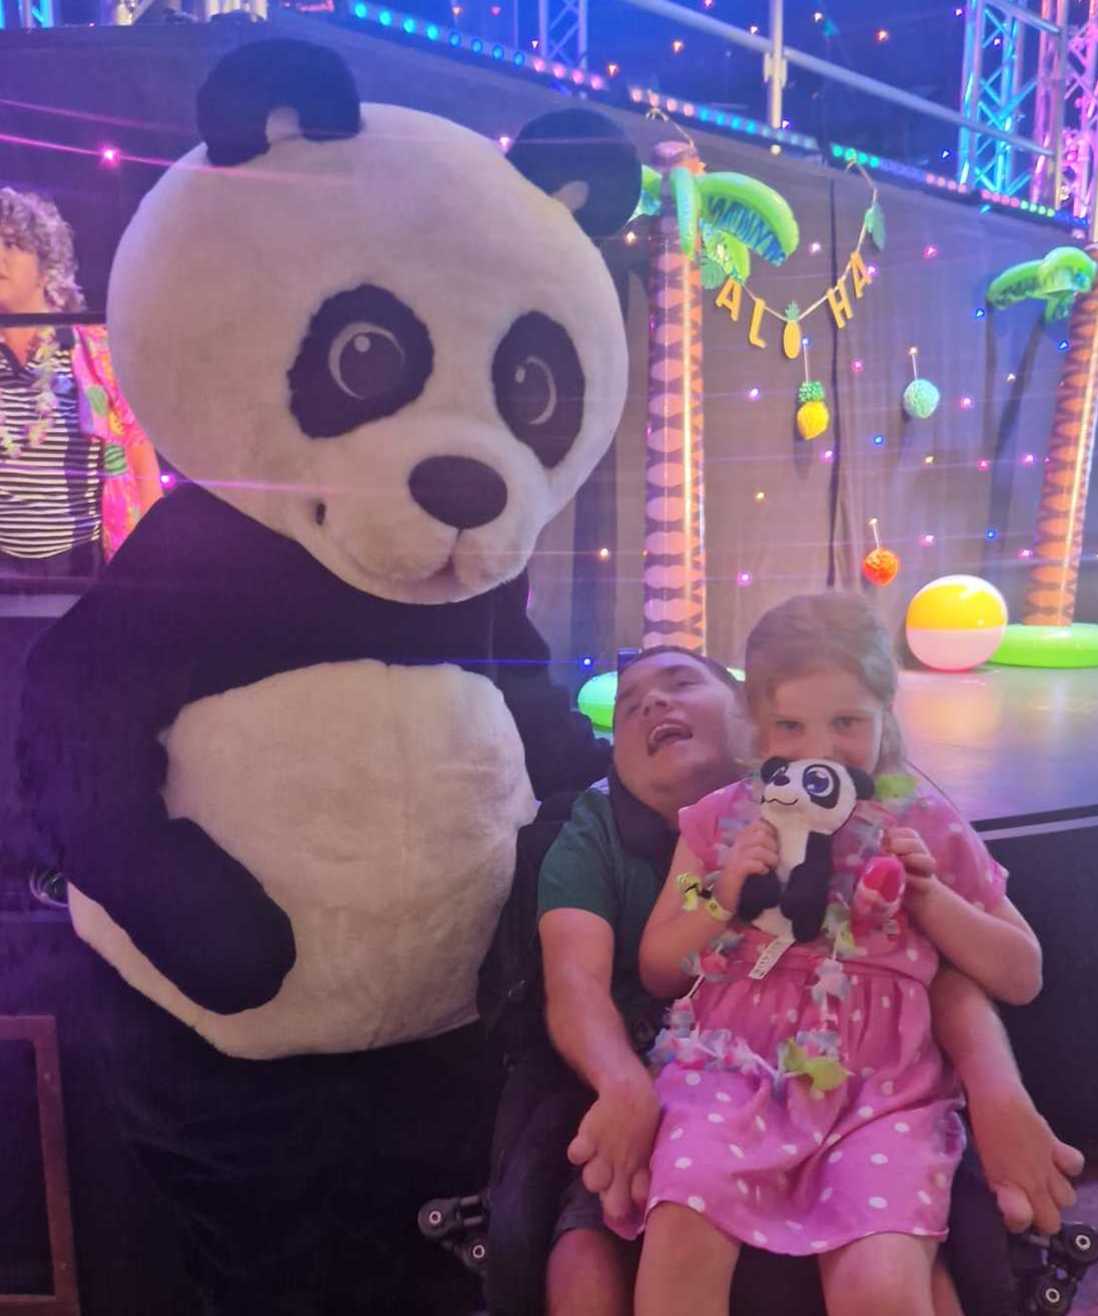 Beach Party at Potters Resort, Hopton on Sea. George, Violet and Boo the Panda having fun at kids club!